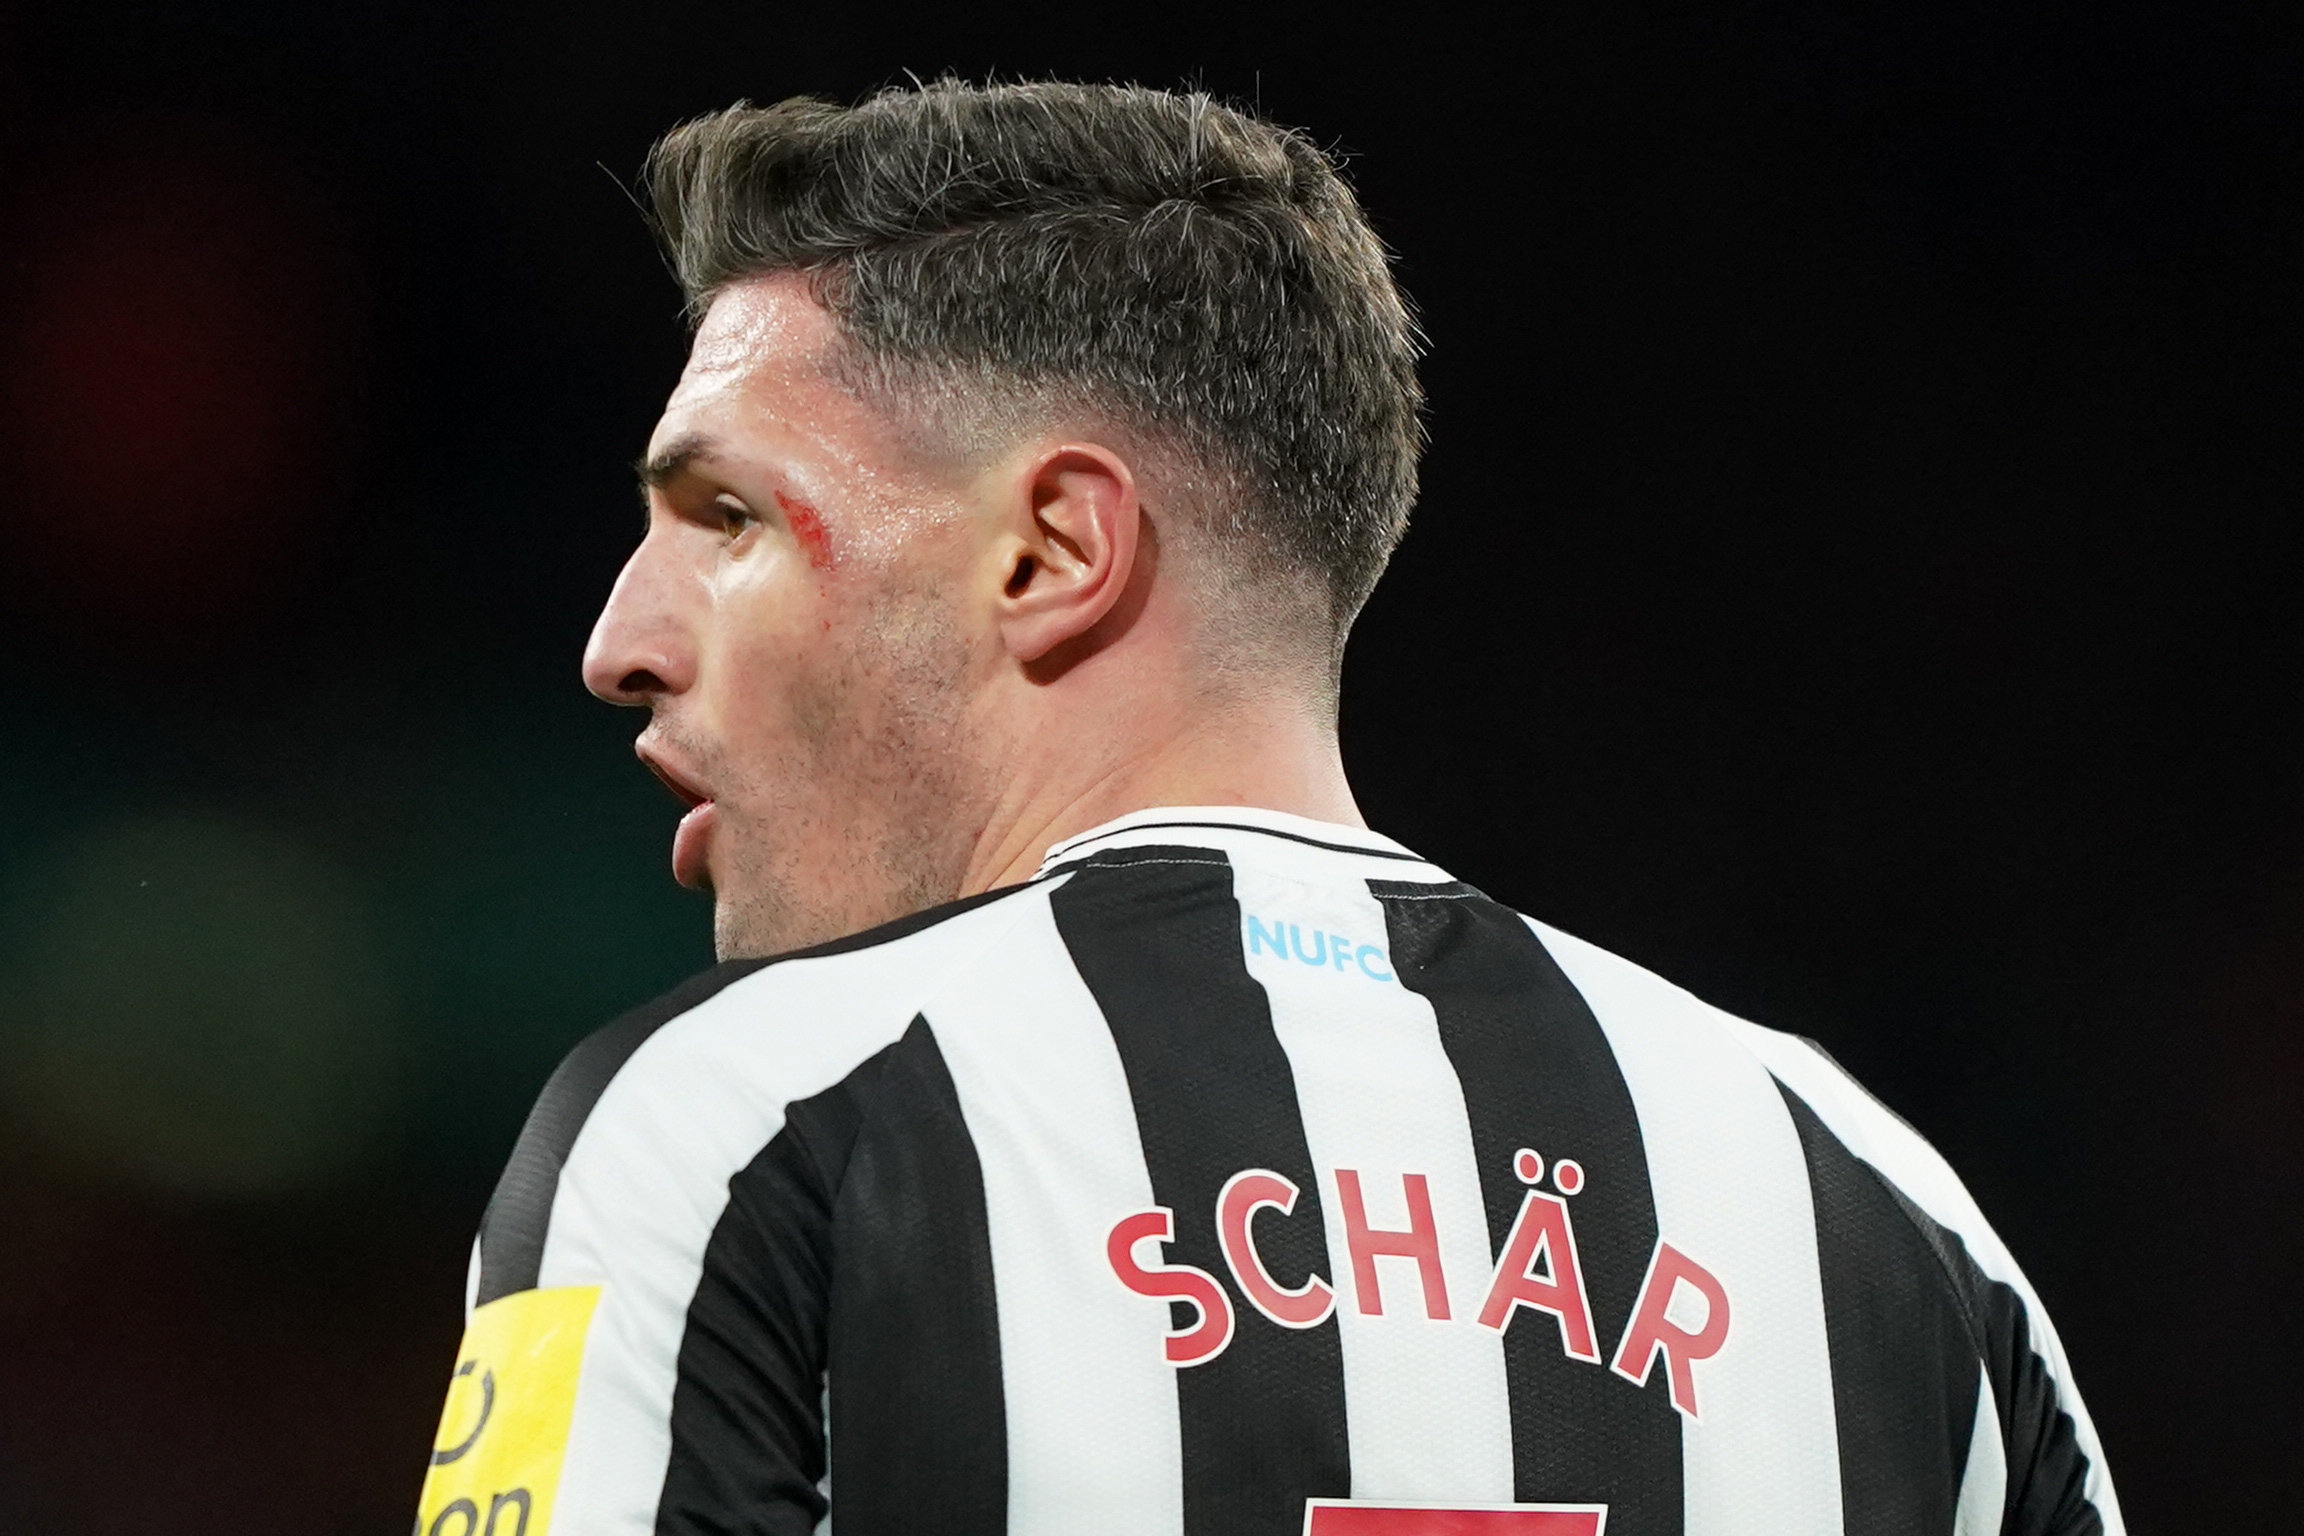 Newcastle defender Fabian Schar ruled out for the rest of the season